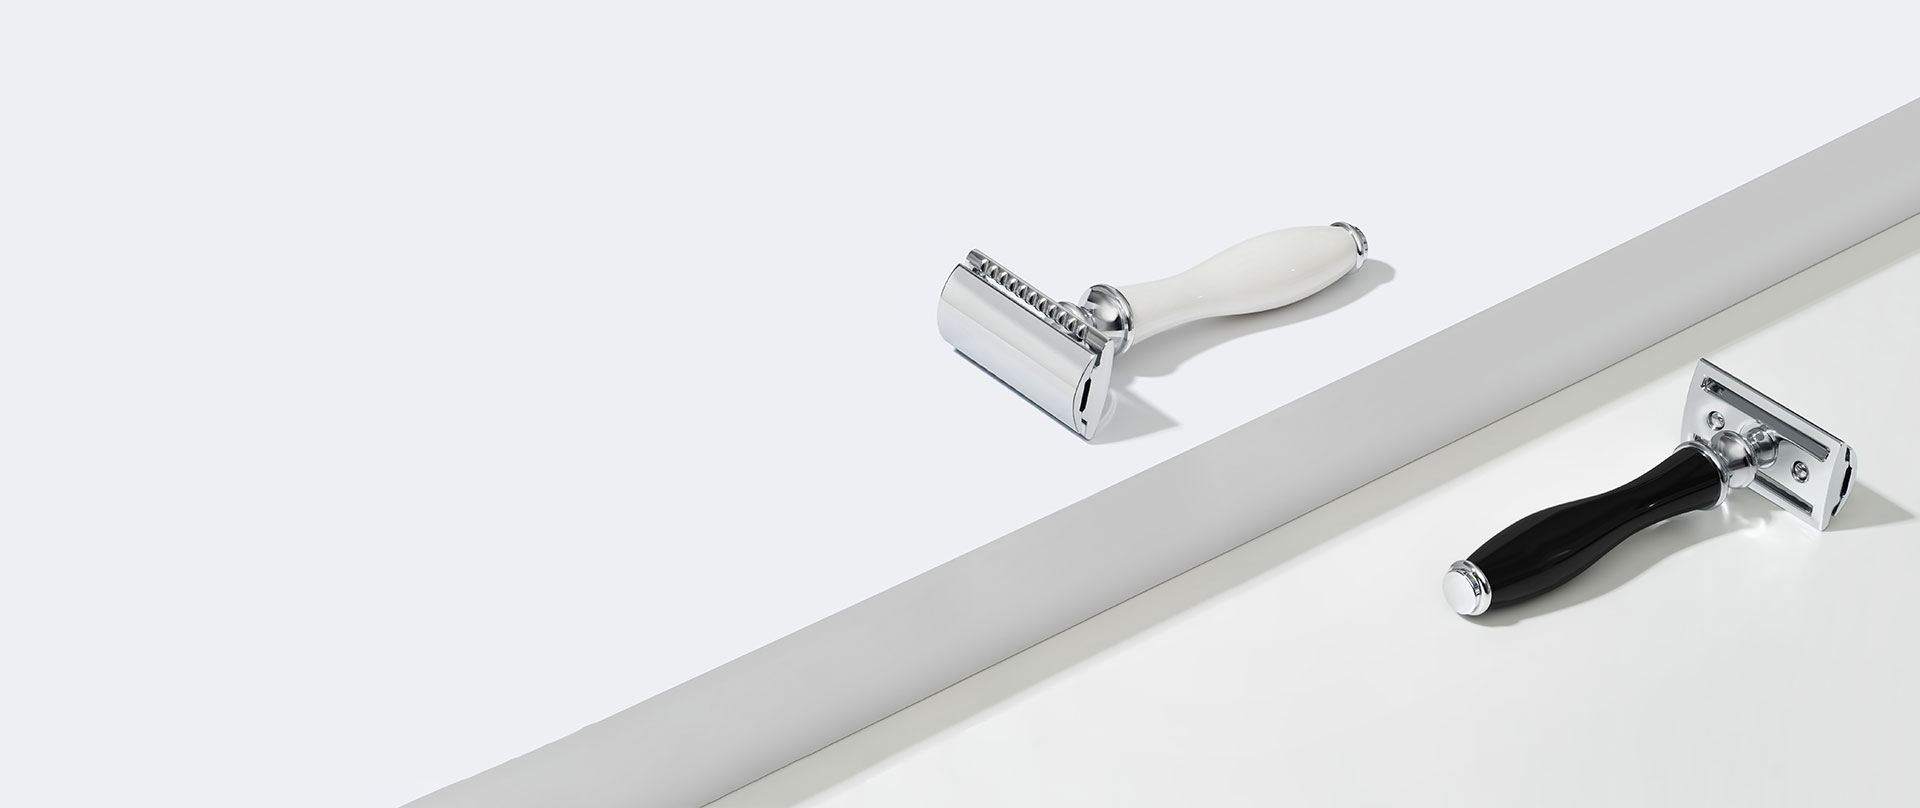 Two safety razors from Vali. White and black.